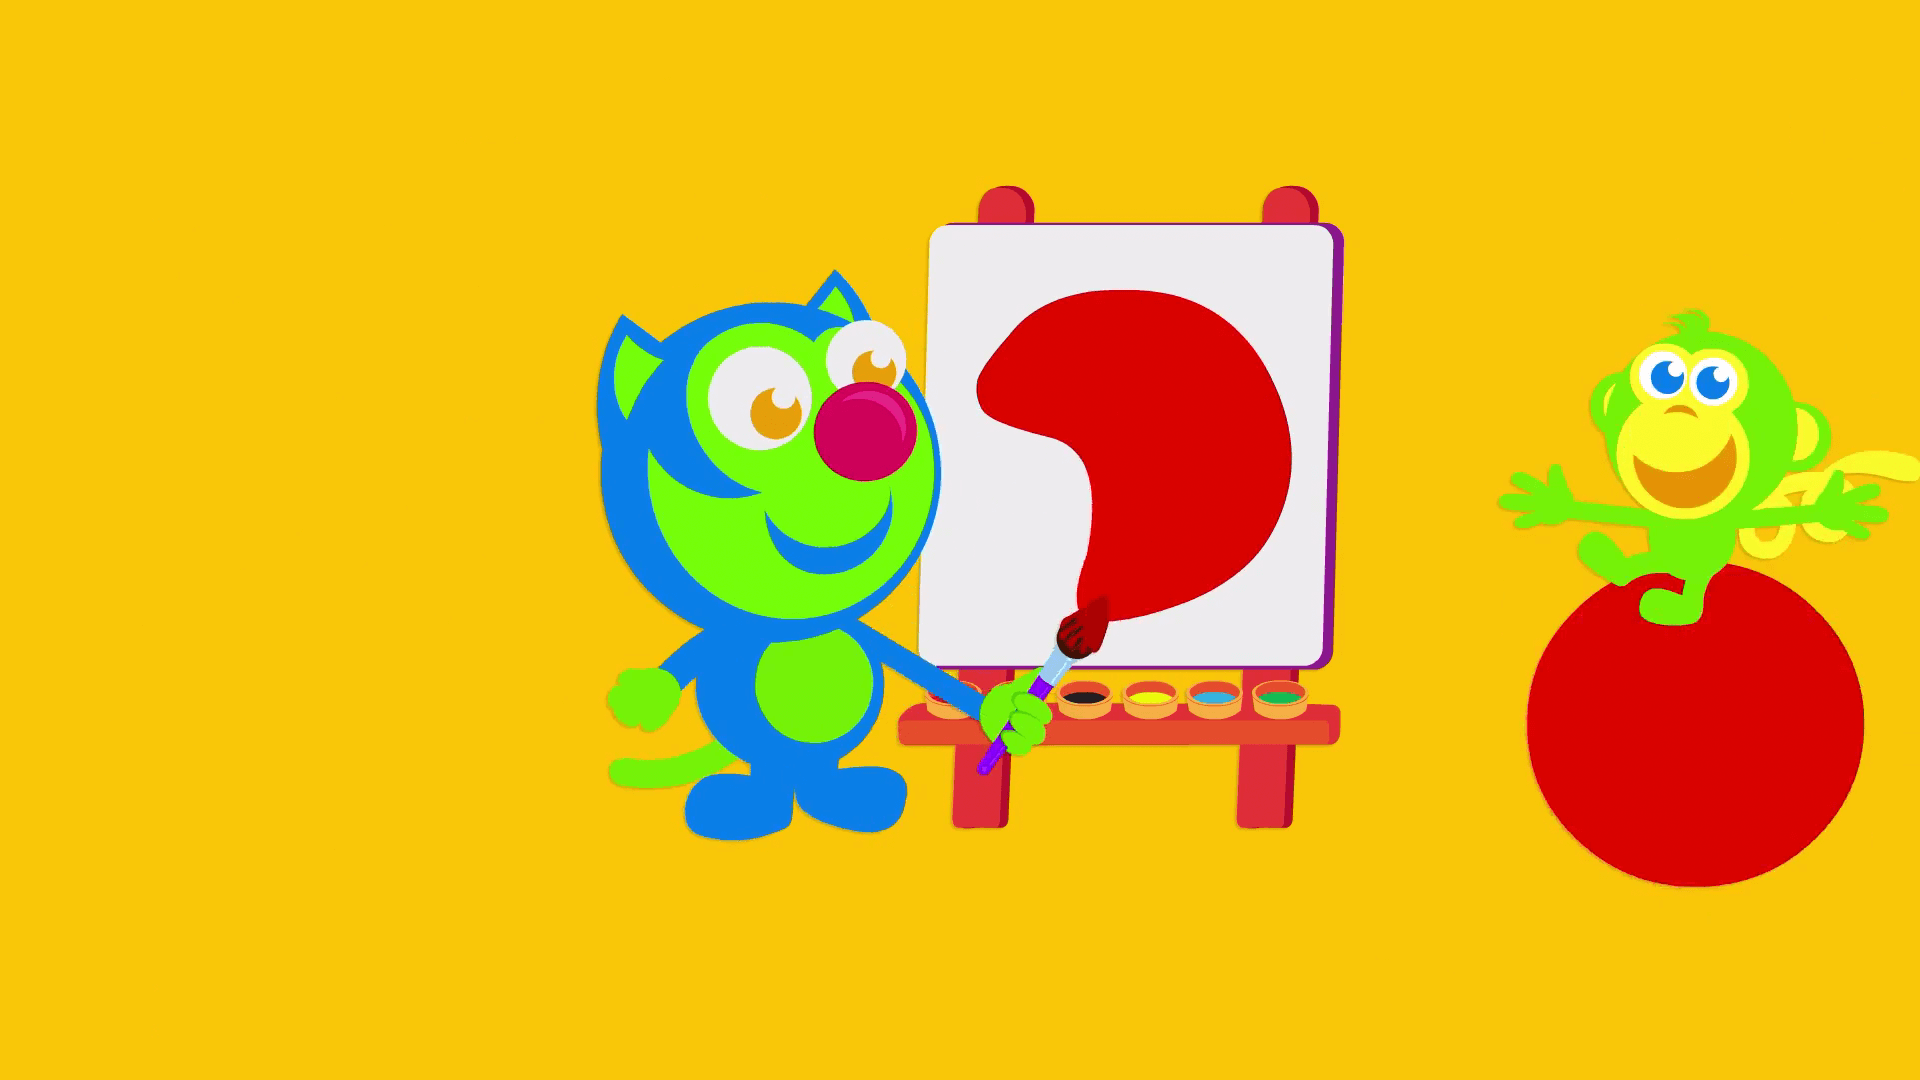 slycat paints on easel in episode of the kneebouncers show on babyfirsttv